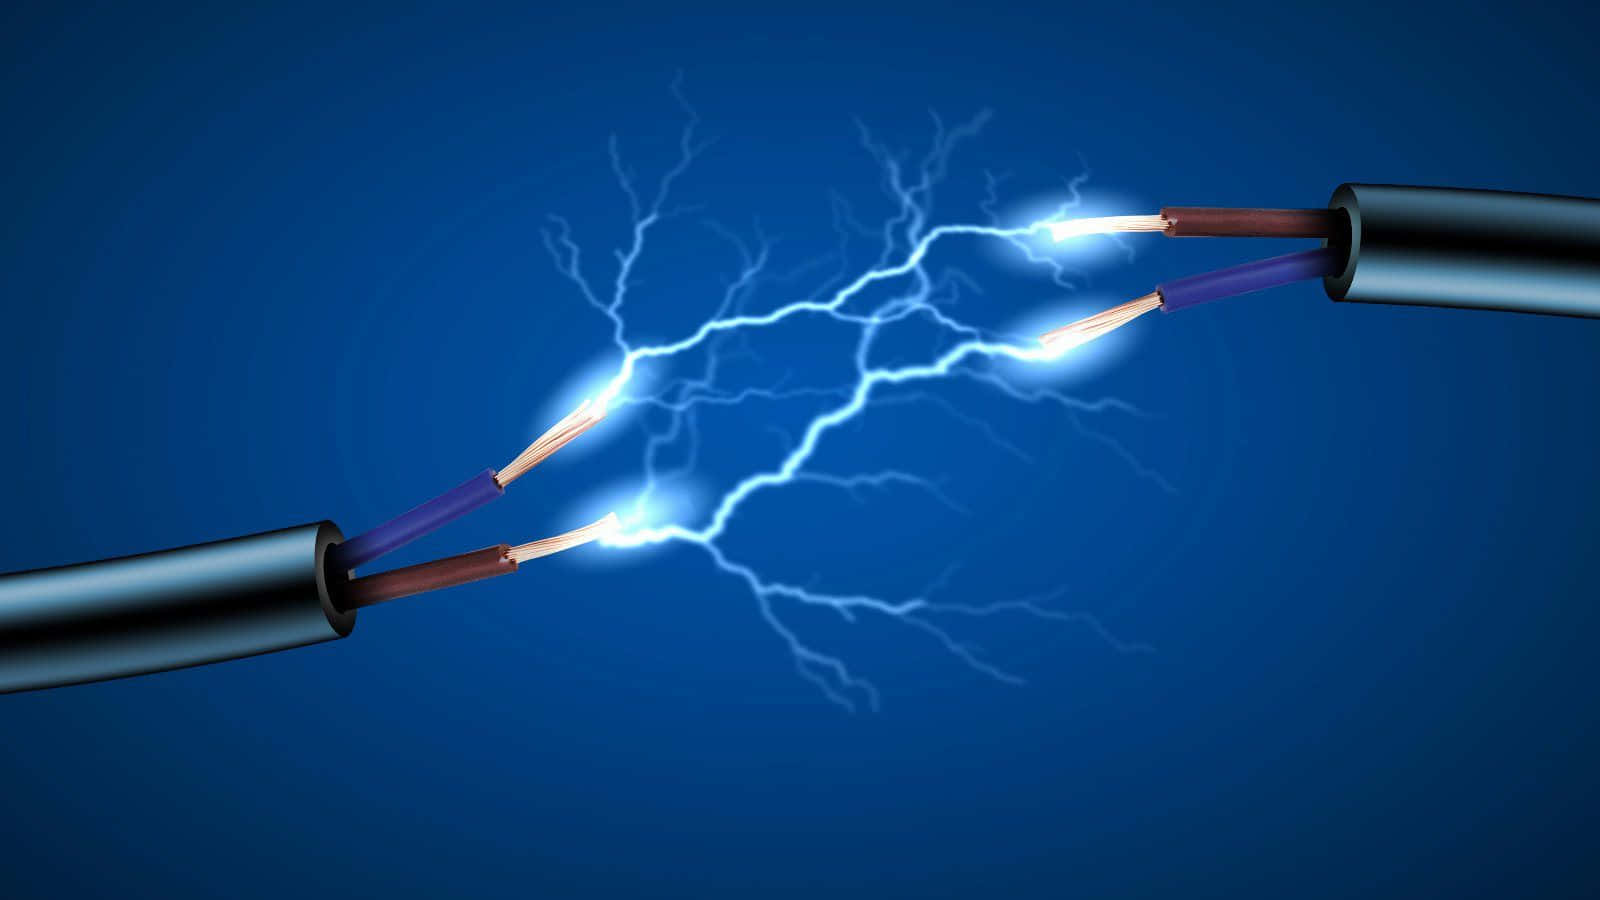 Two Electrical Wires With Lightning